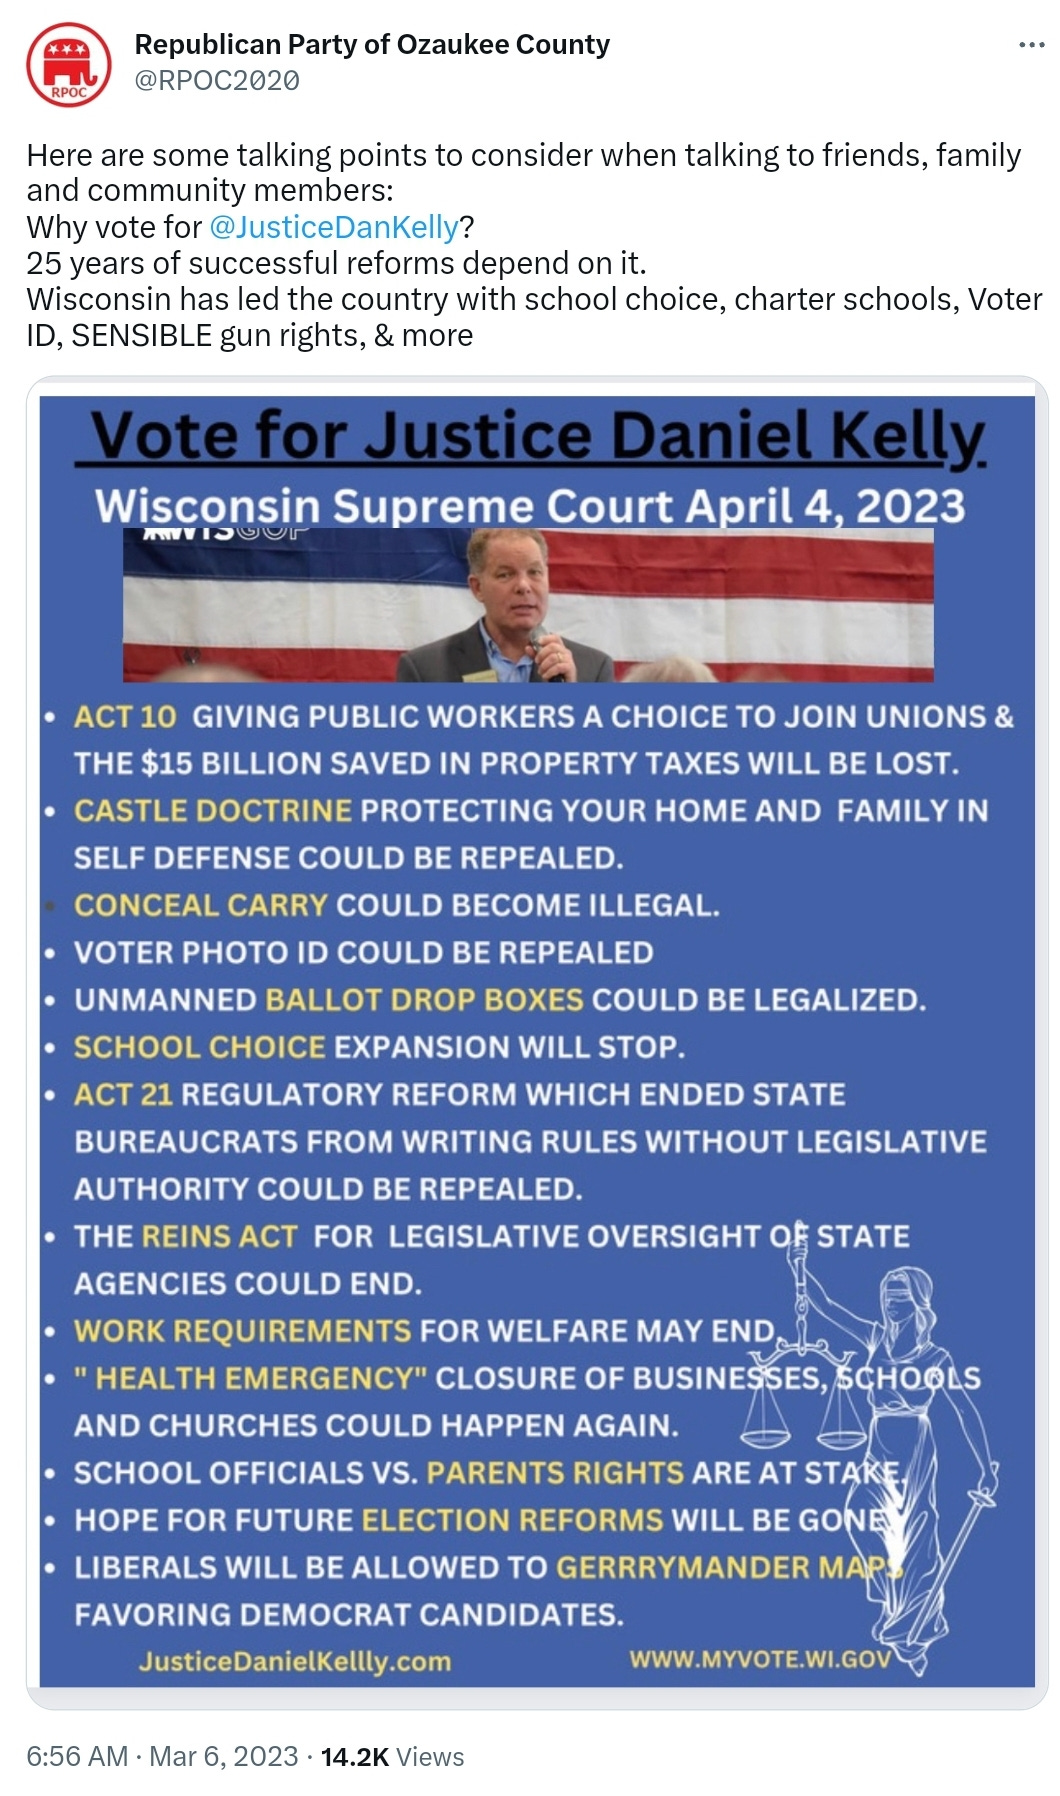 Here are some talking points to consider when talking to friends, family and community members:  Why vote for  @JusticeDanKelly ?  25 years of successful reforms depend on it. Wisconsin has led the country with school choice, charter schools, Voter ID, SENSIBLE gun rights, & more